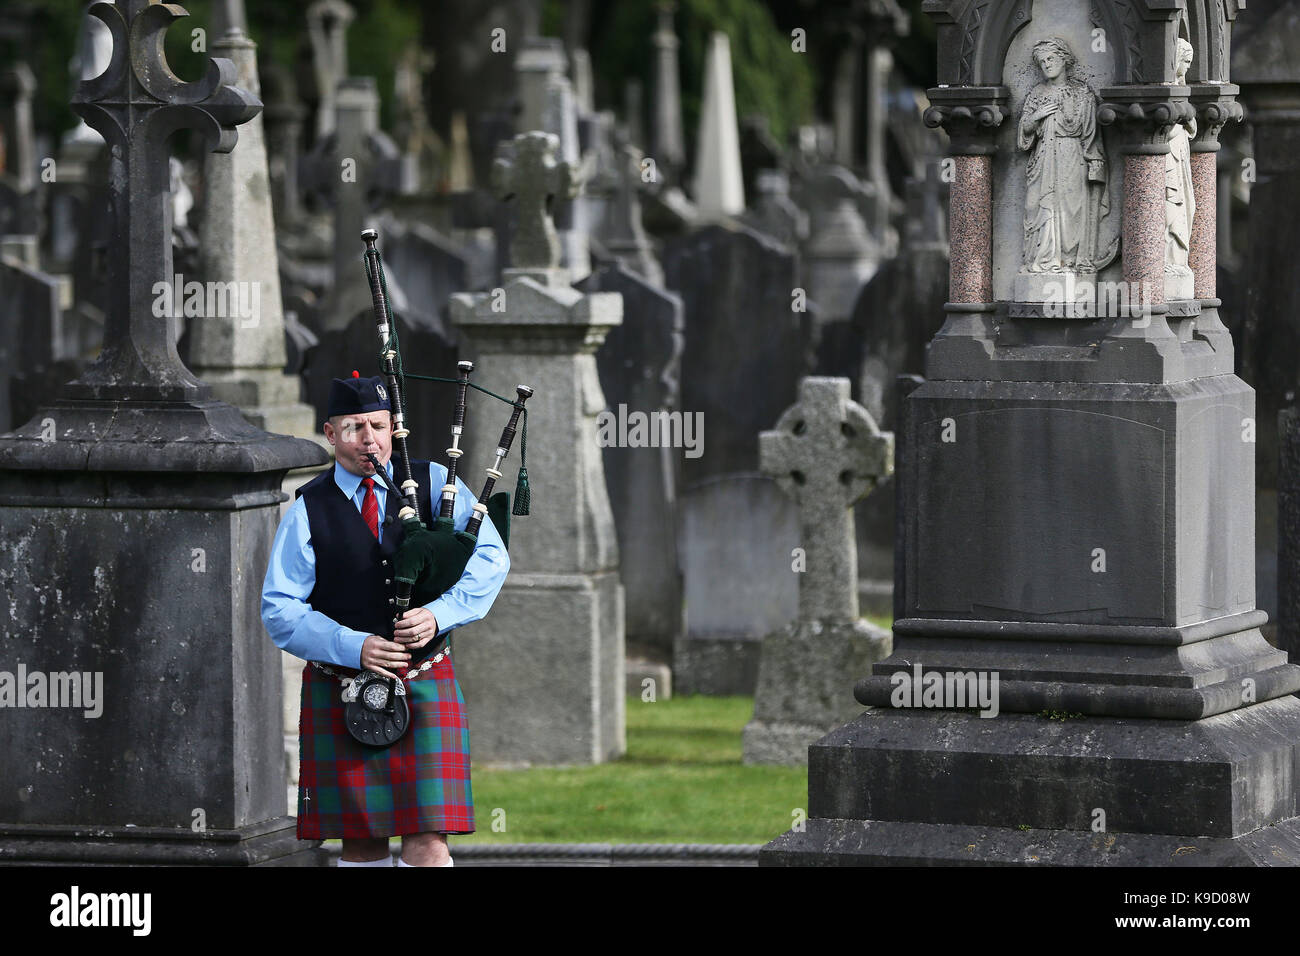 A member of the Black Raven pipe band plays in Glasnevin cemetery, Dublin, during the state commemoration for the centenary of the funeral of 1916 Rising leader Thomas Ashe. Stock Photo